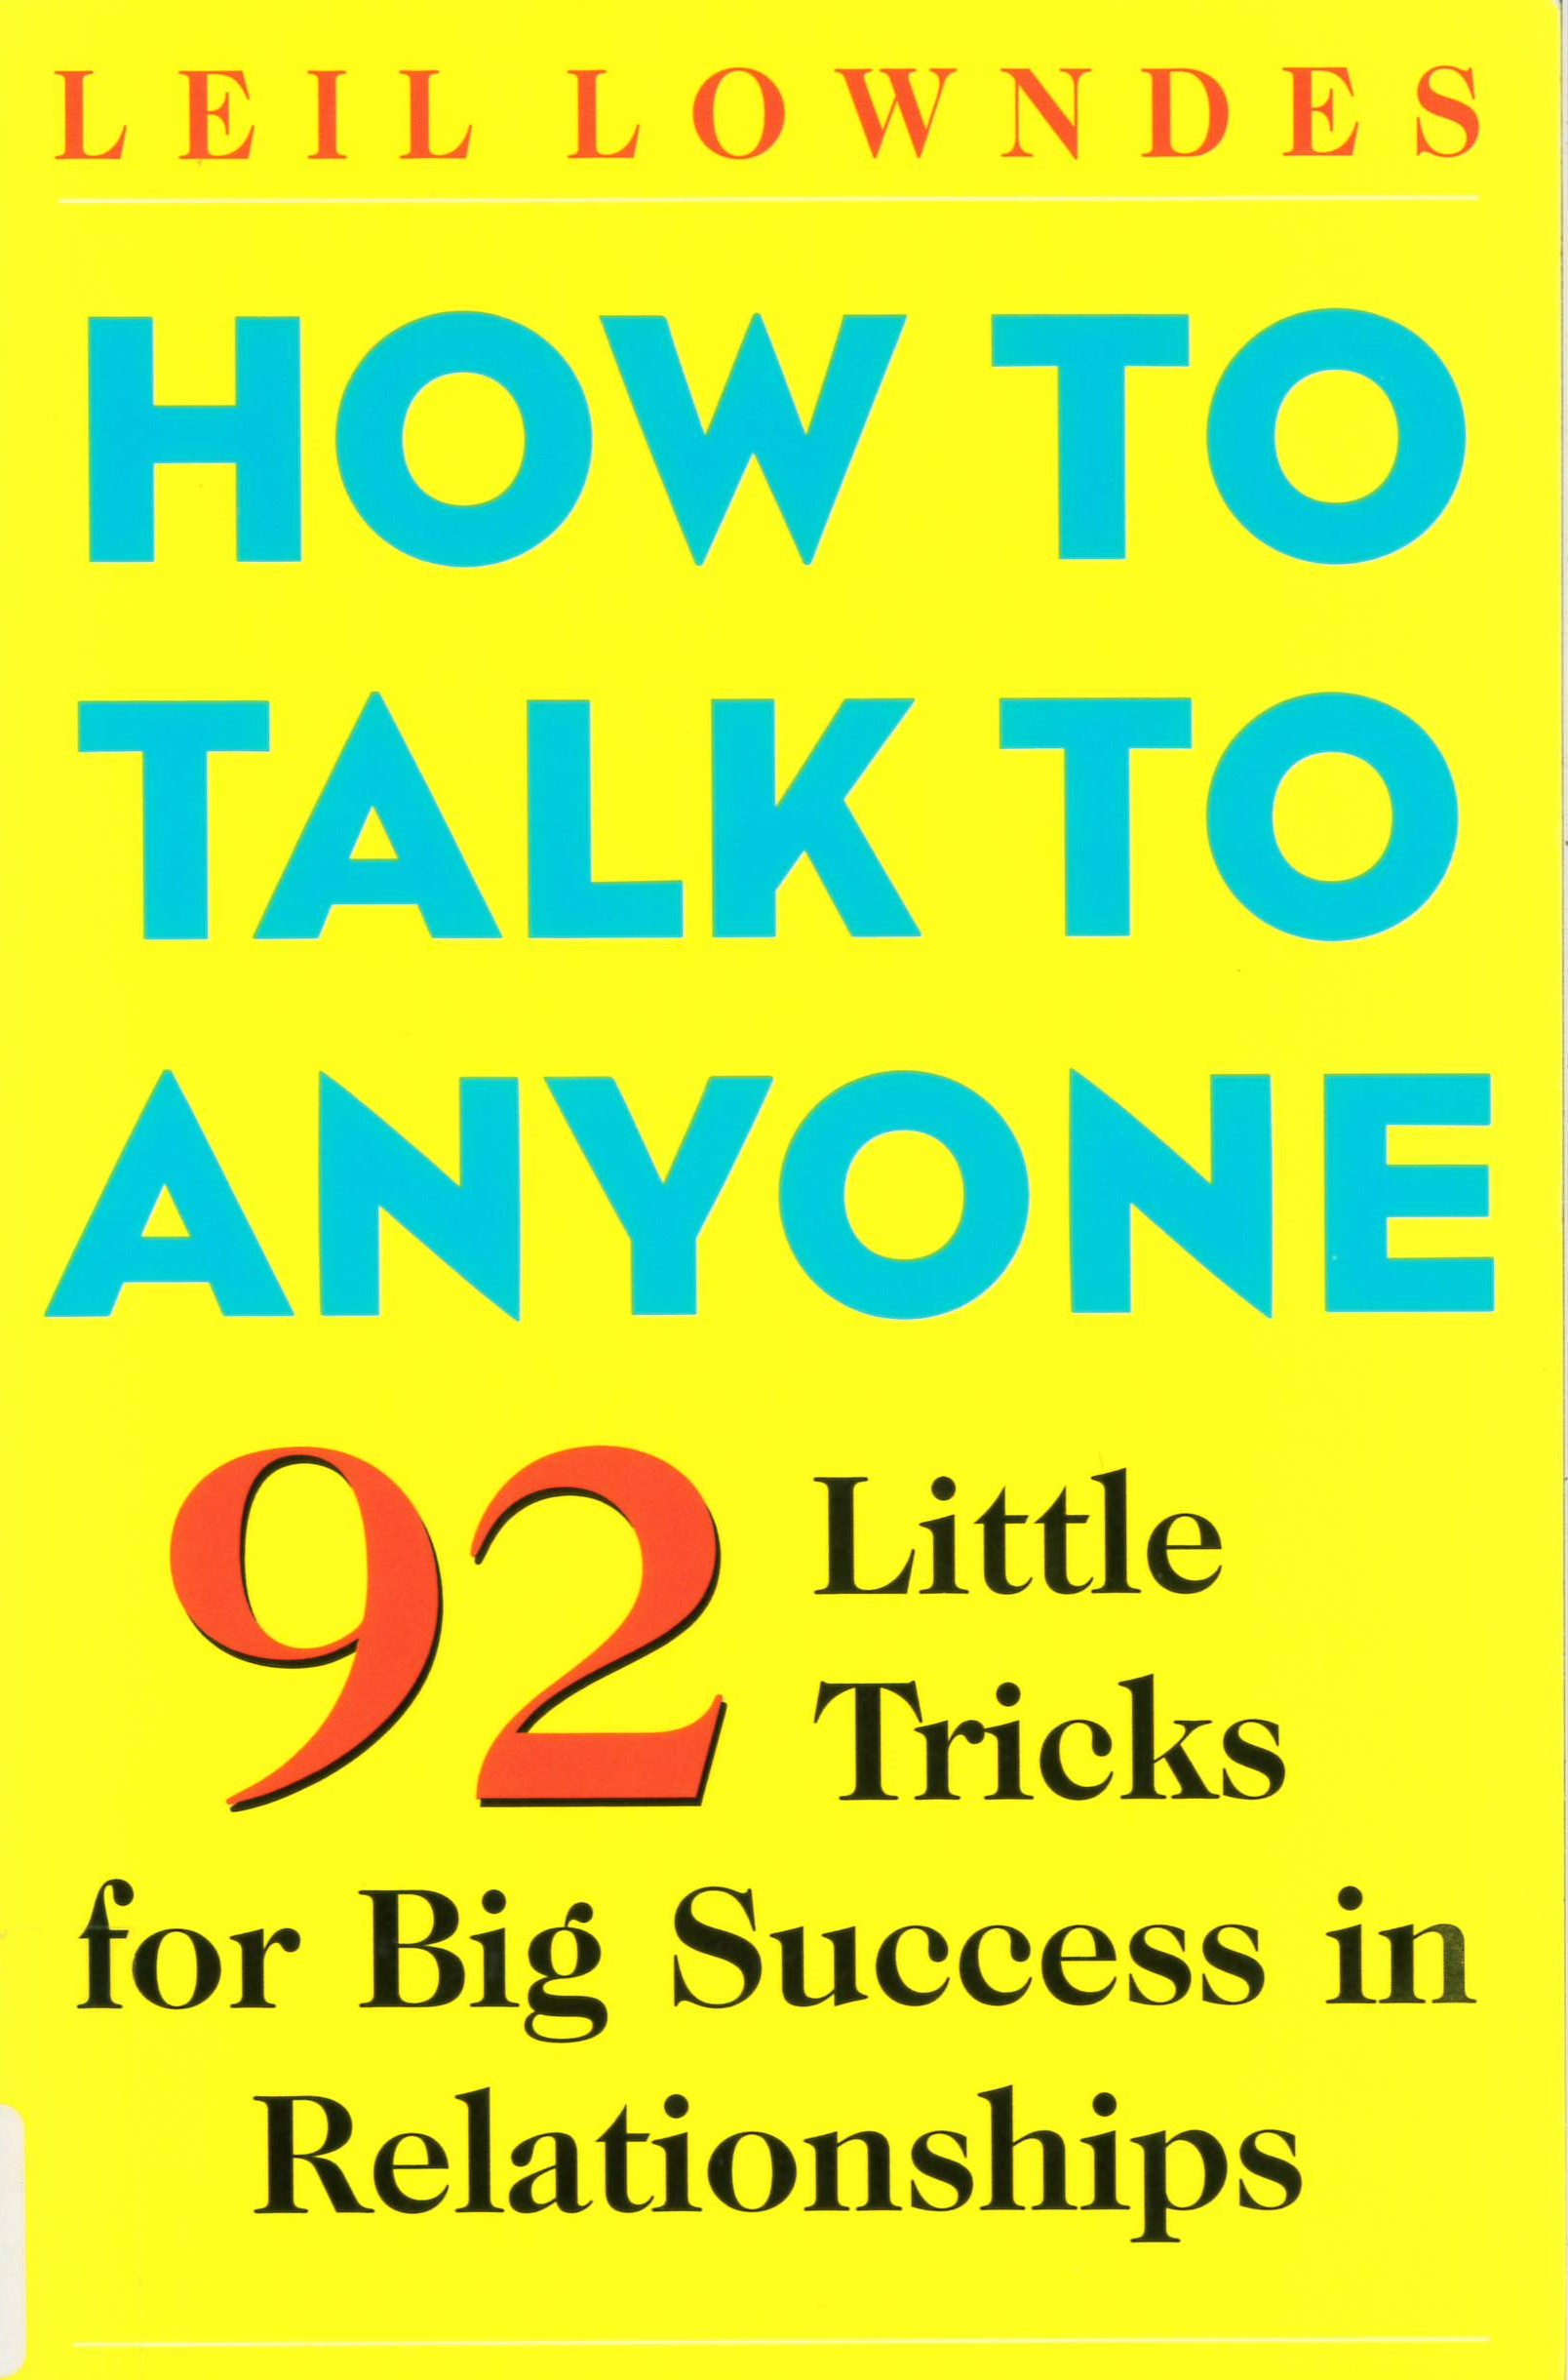 How to talk to anyone : 92 little tricks for big success in relationships /